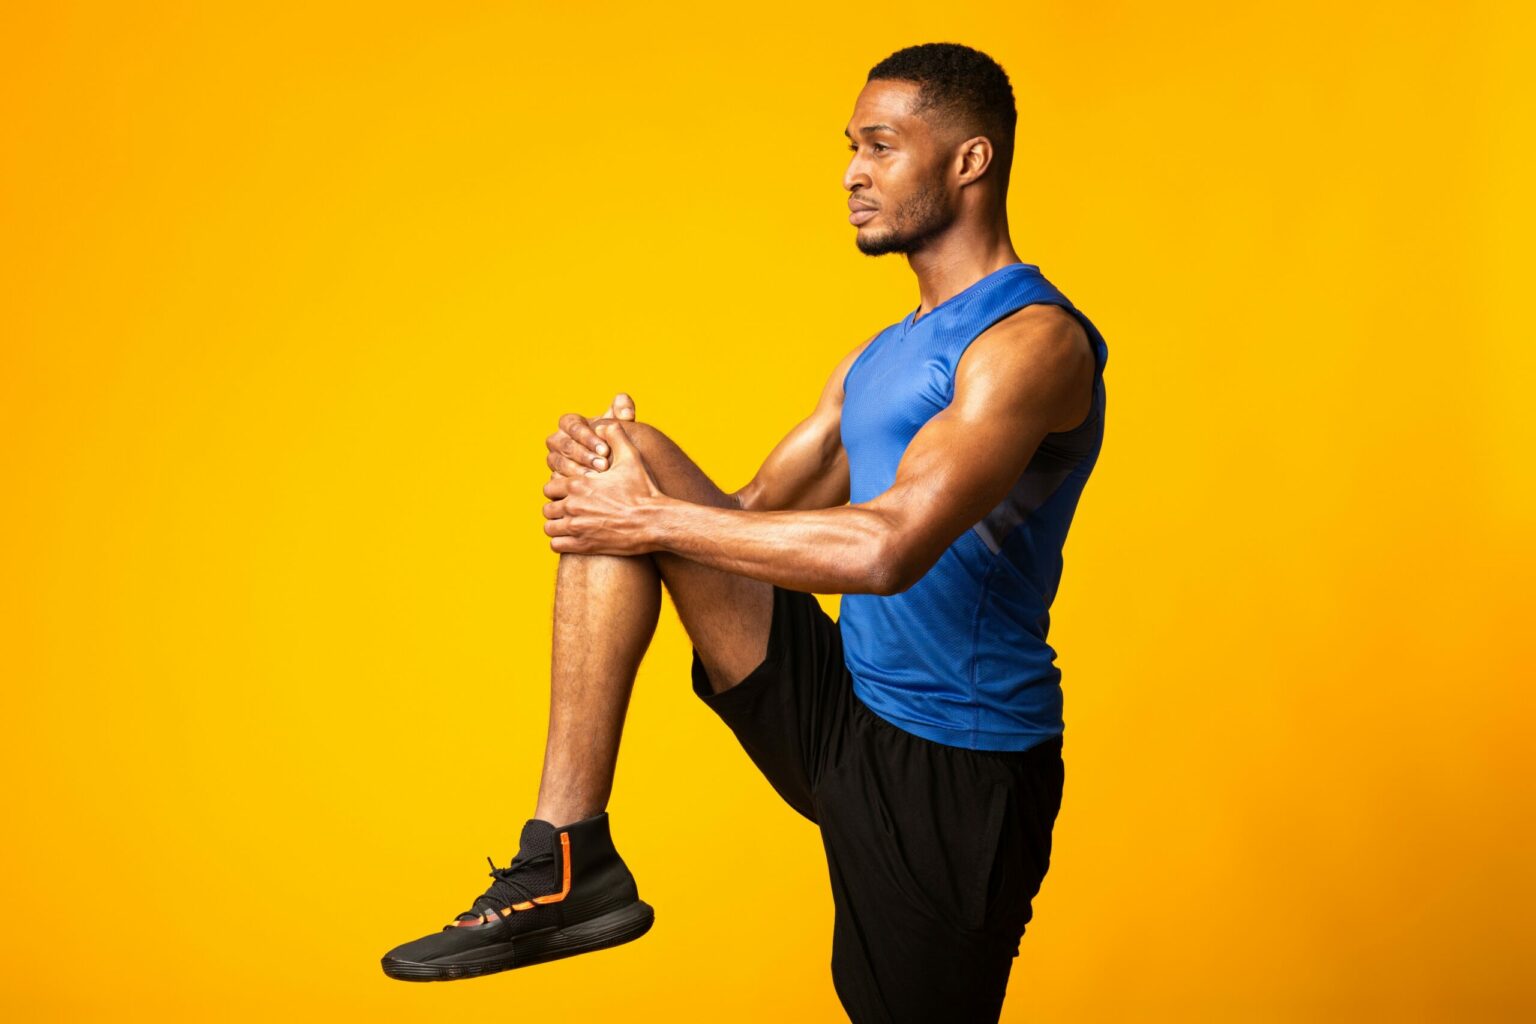 athlete doing warm-up exercise with a yellow background (not original photo)